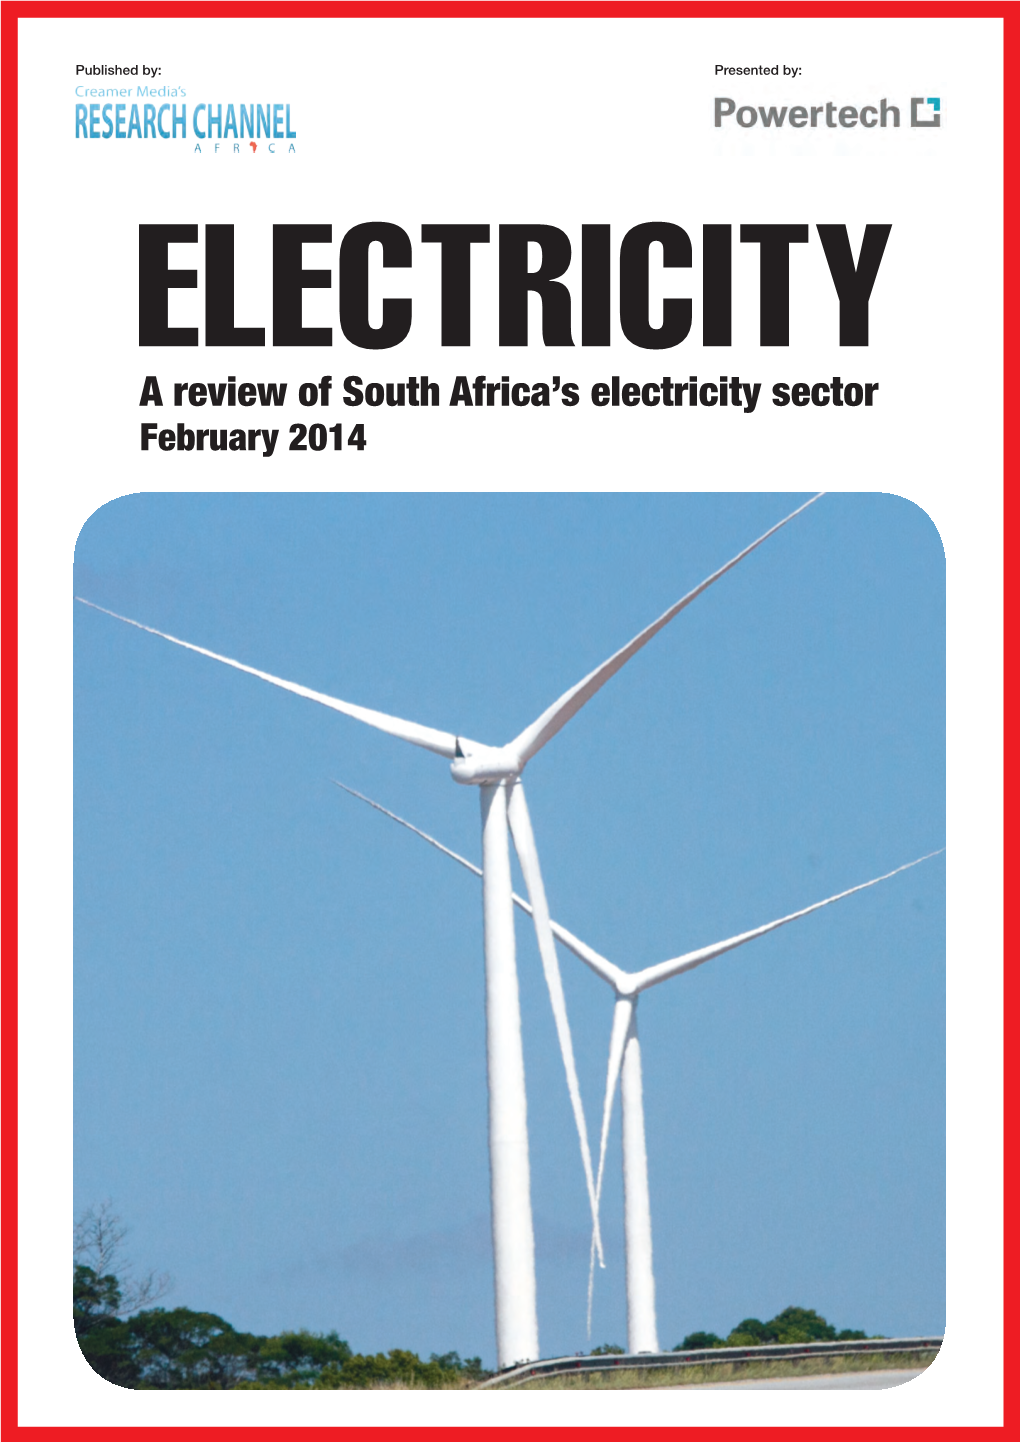 A Review of South Africa's Electricity Sector